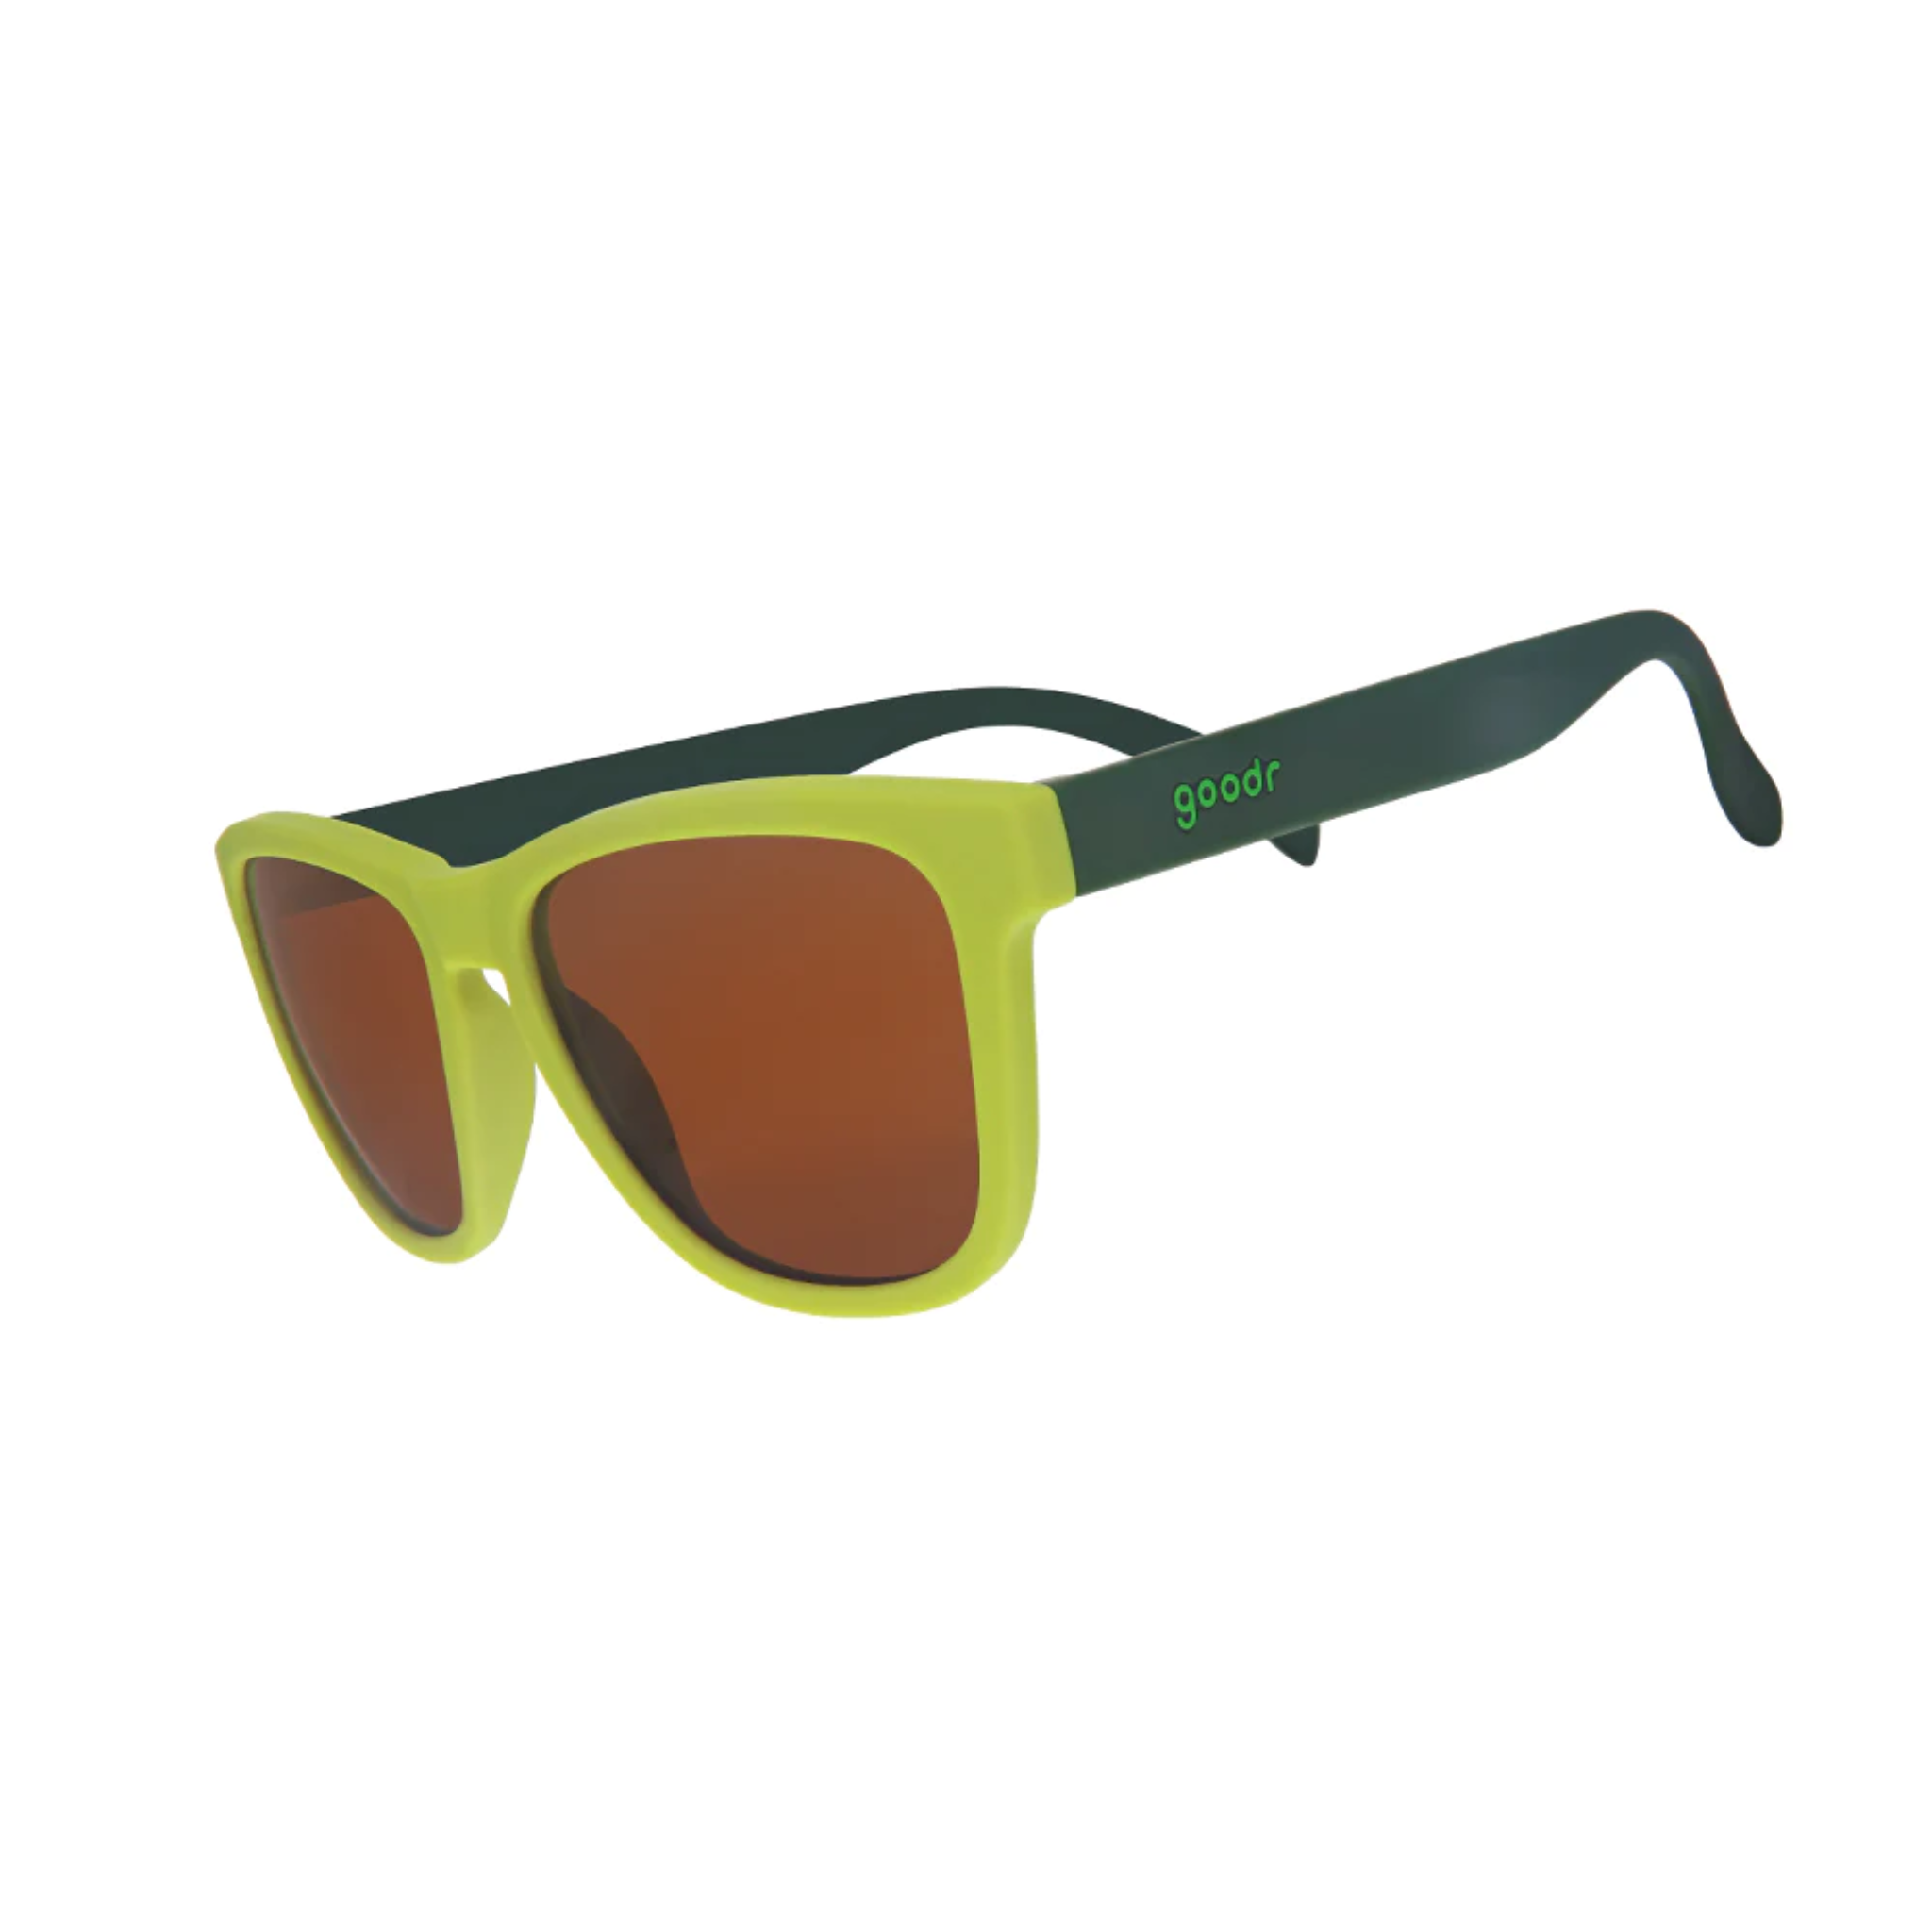 Goodr Sunglasses - The OGs: Going to ValhallaWitness